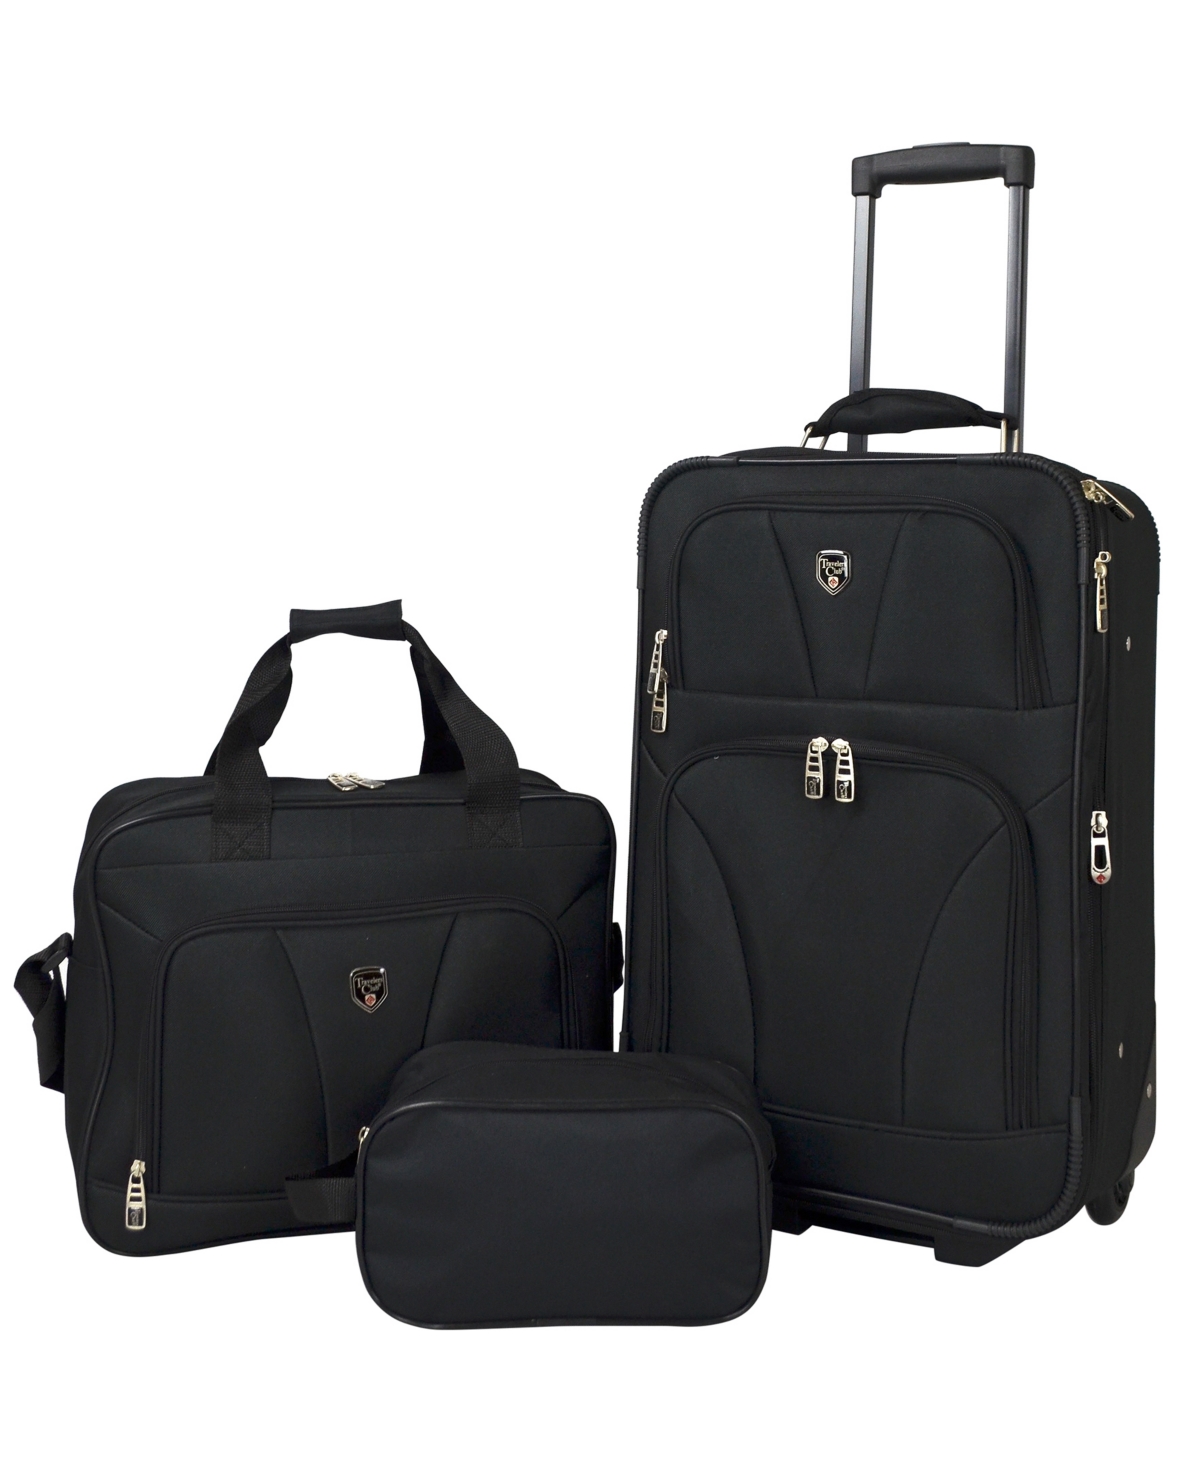 Travelers Club Bowman Eva Expandable Value Luggage And Travel Set, 3 Piece In Black